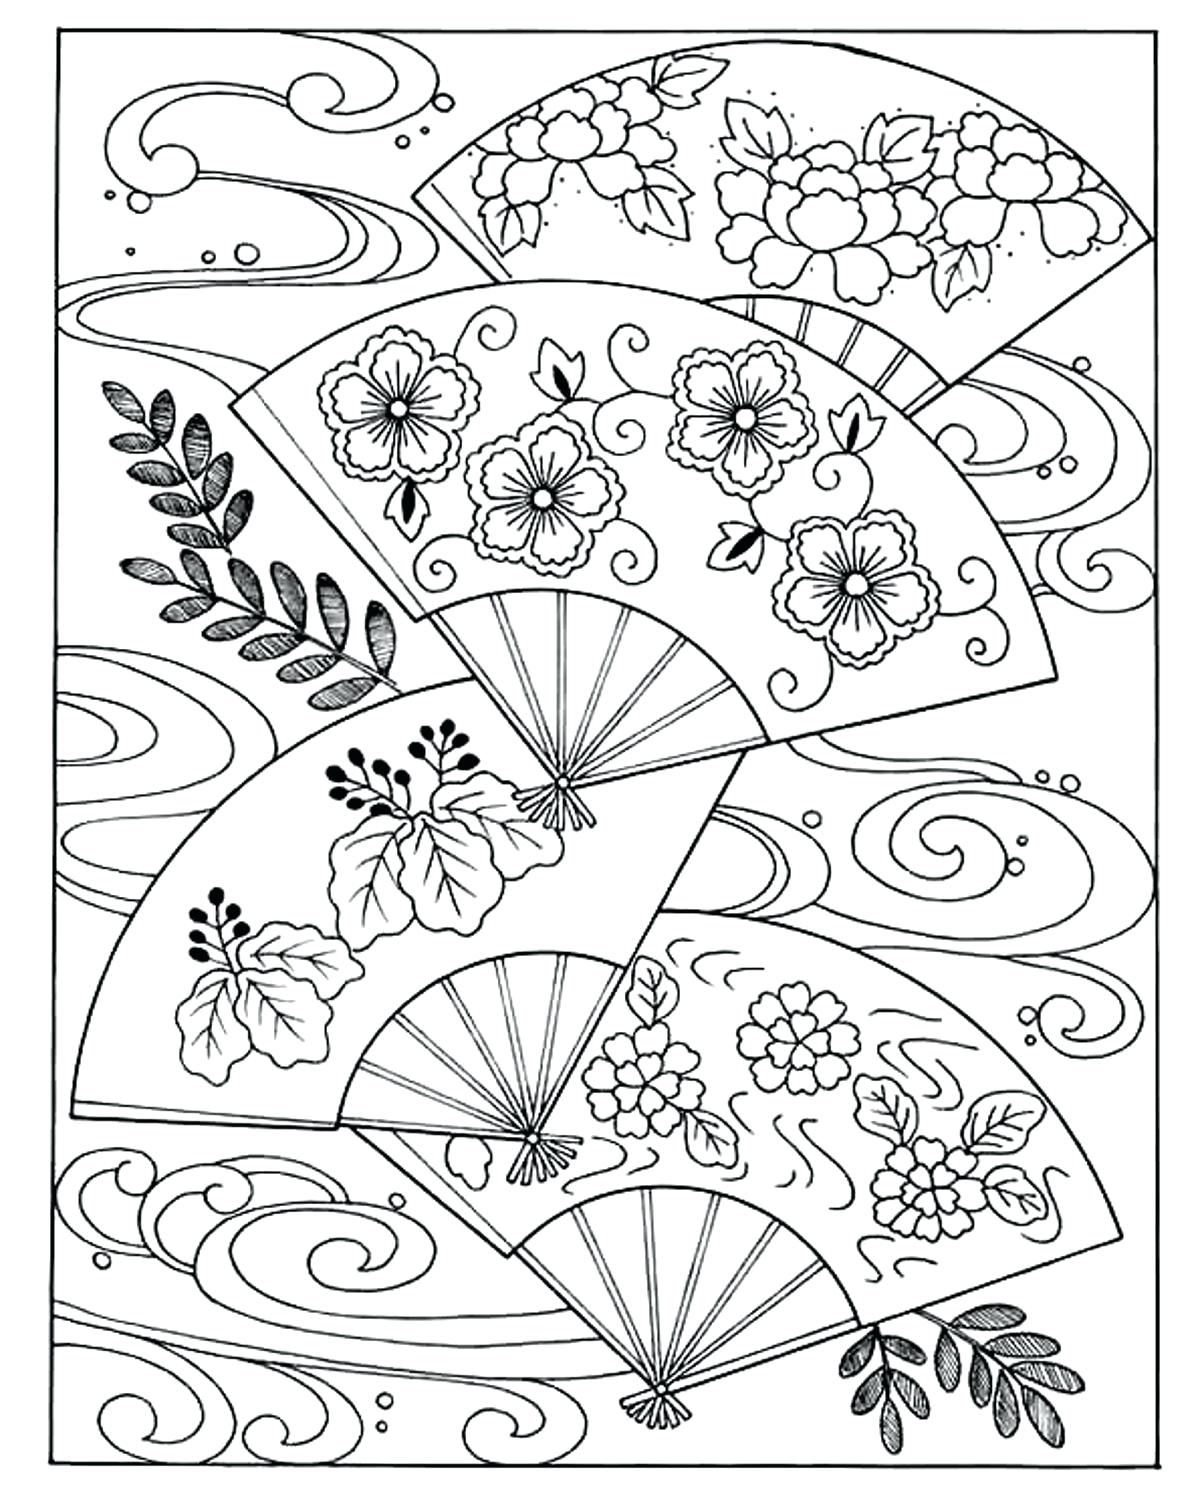 Japanese Coloring Pages : Japan - Coloring pages for adults : coloring